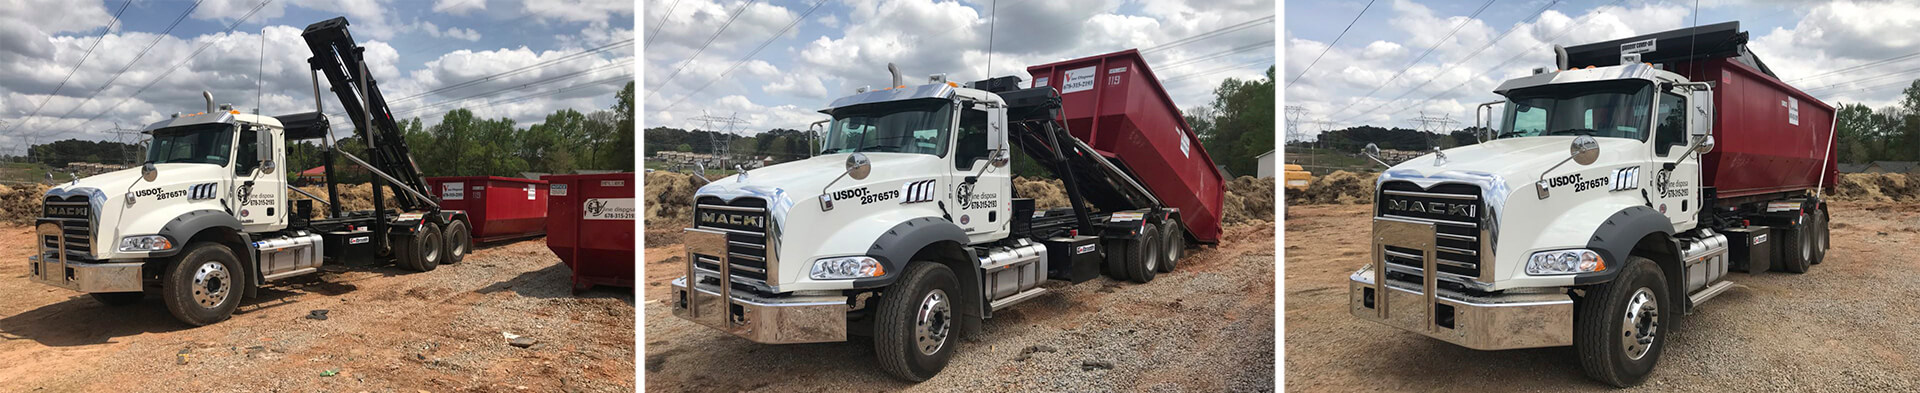 Dumpster Rentals in Lowell, NC